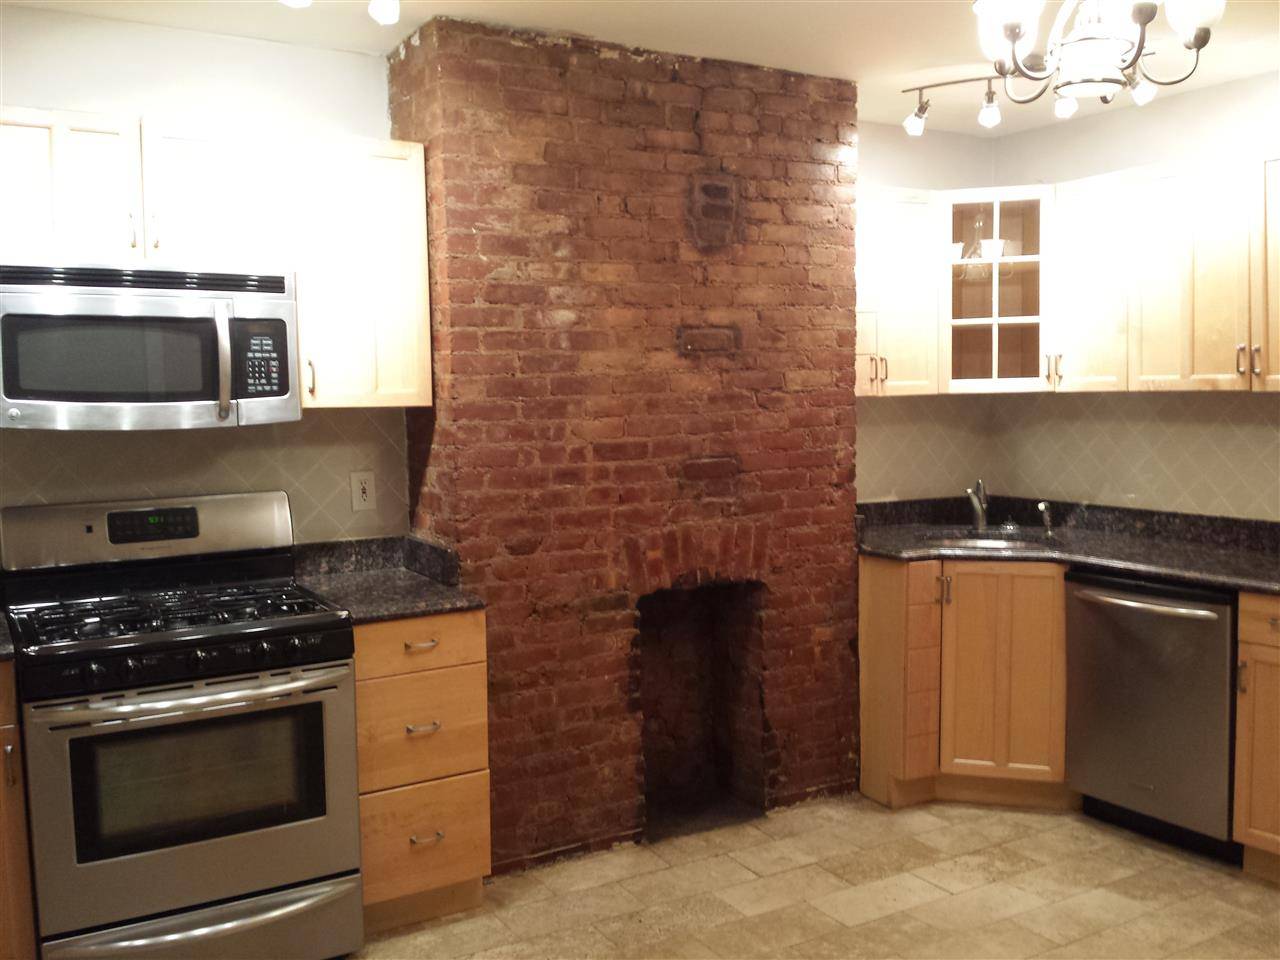 2bedrooms (1 bedroom plus den that can easily be a 2nd bedroom) 1 bath in the historic downtown Jersey City Village area